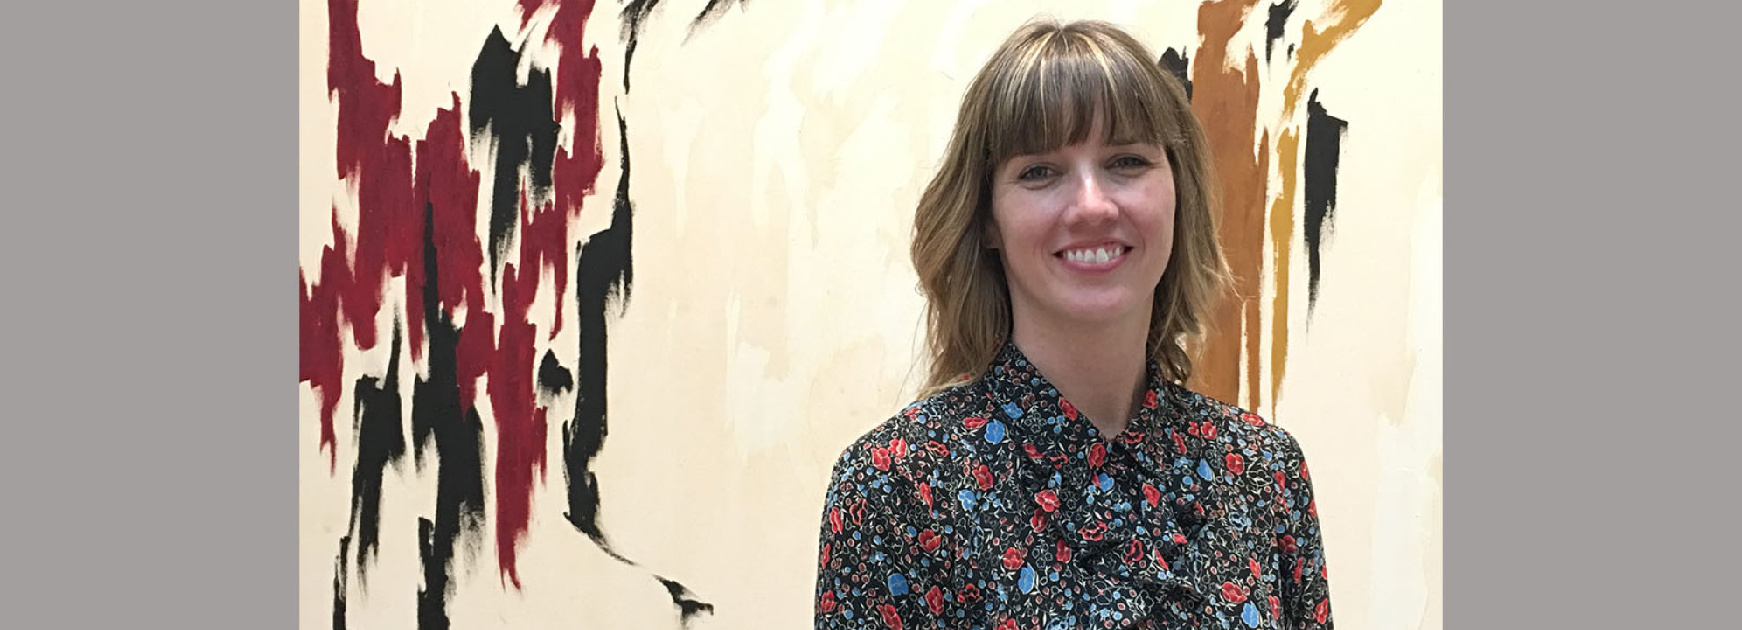 A woman with blond hair and bangs stands smiling in front of an abstract art piece.